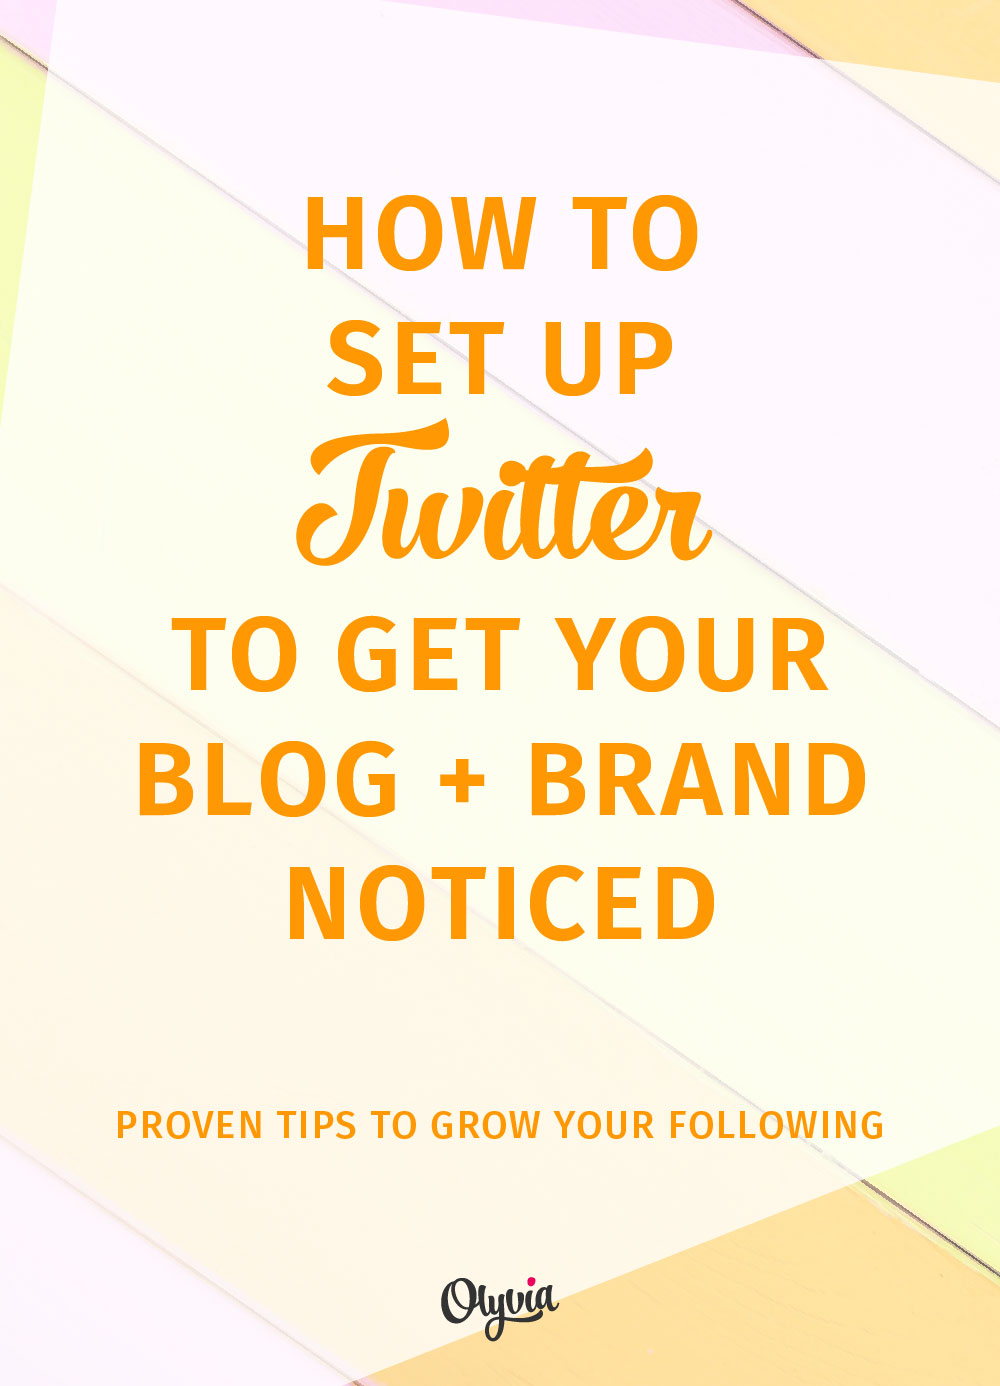 How to set up Twitter to get your blog + business noticed and get followers.